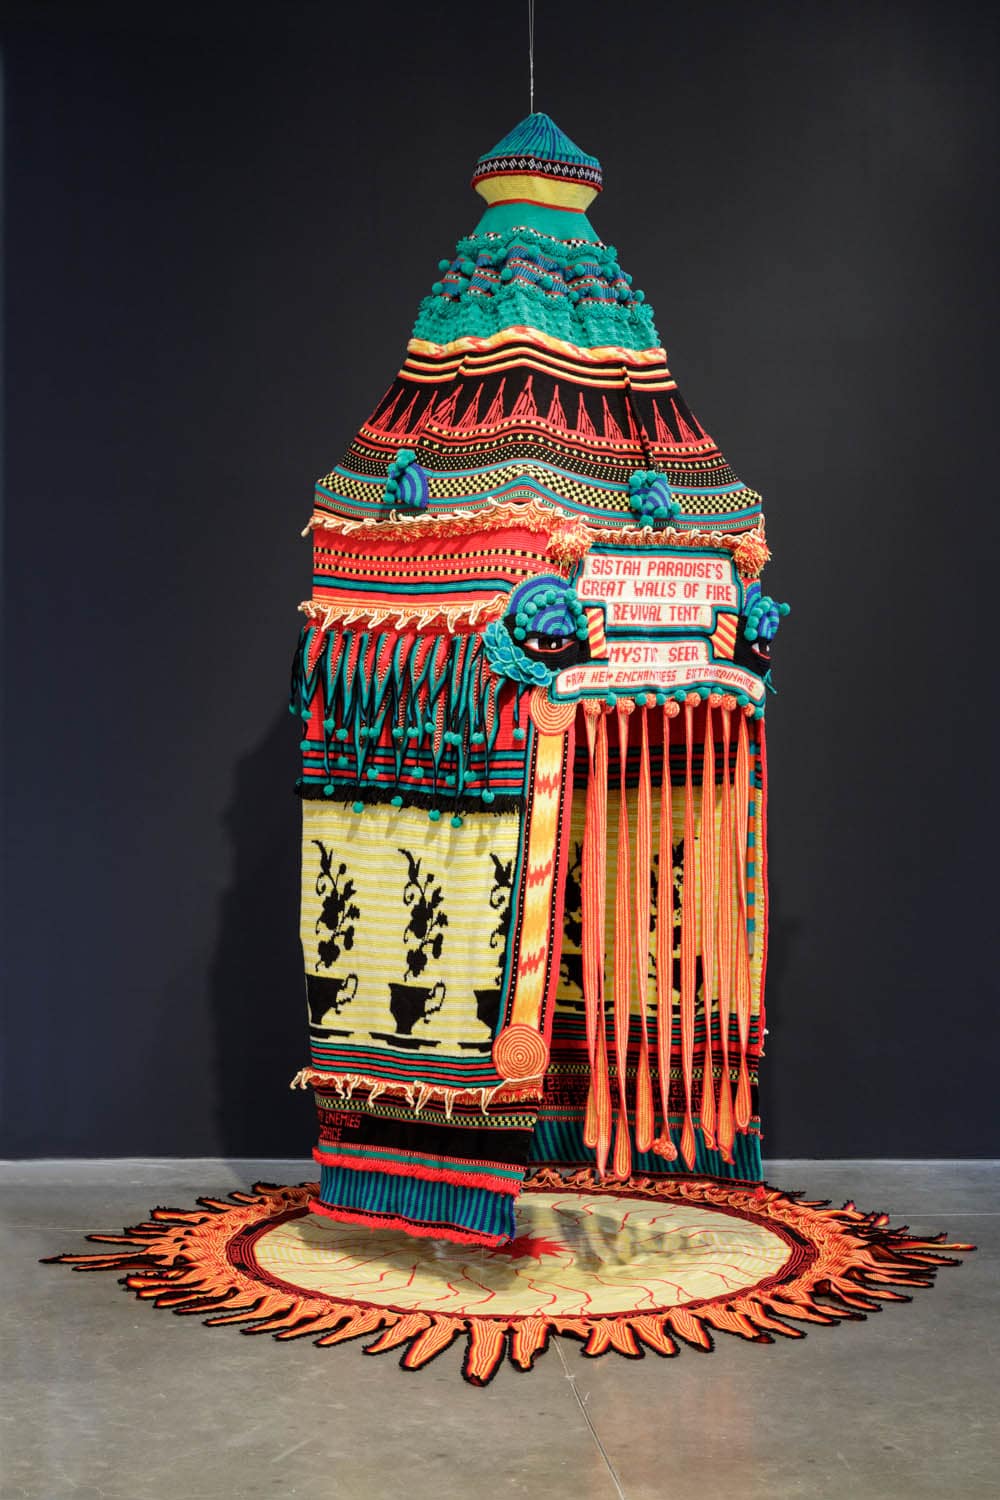 Xenobia Bailey (American, b. 1955). Mothership 1: Sistah Paradise's Great Walls of Fire Revival Tent